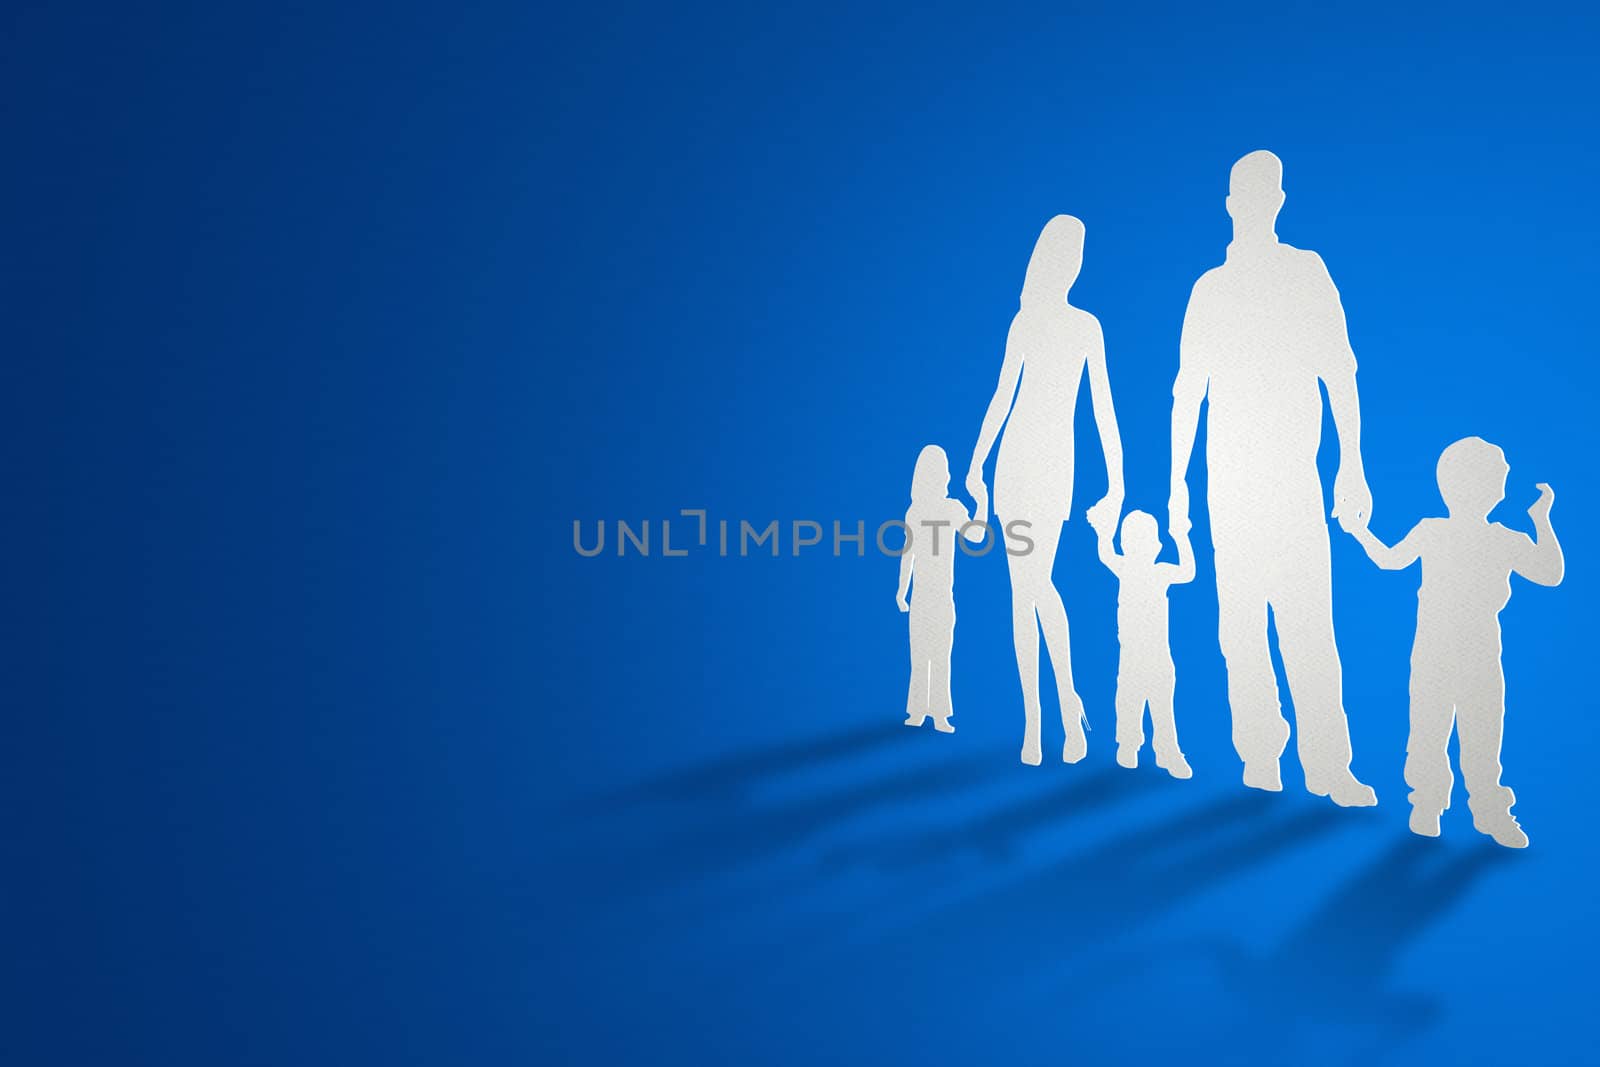 A family cutout from paper standing and casting shadows.